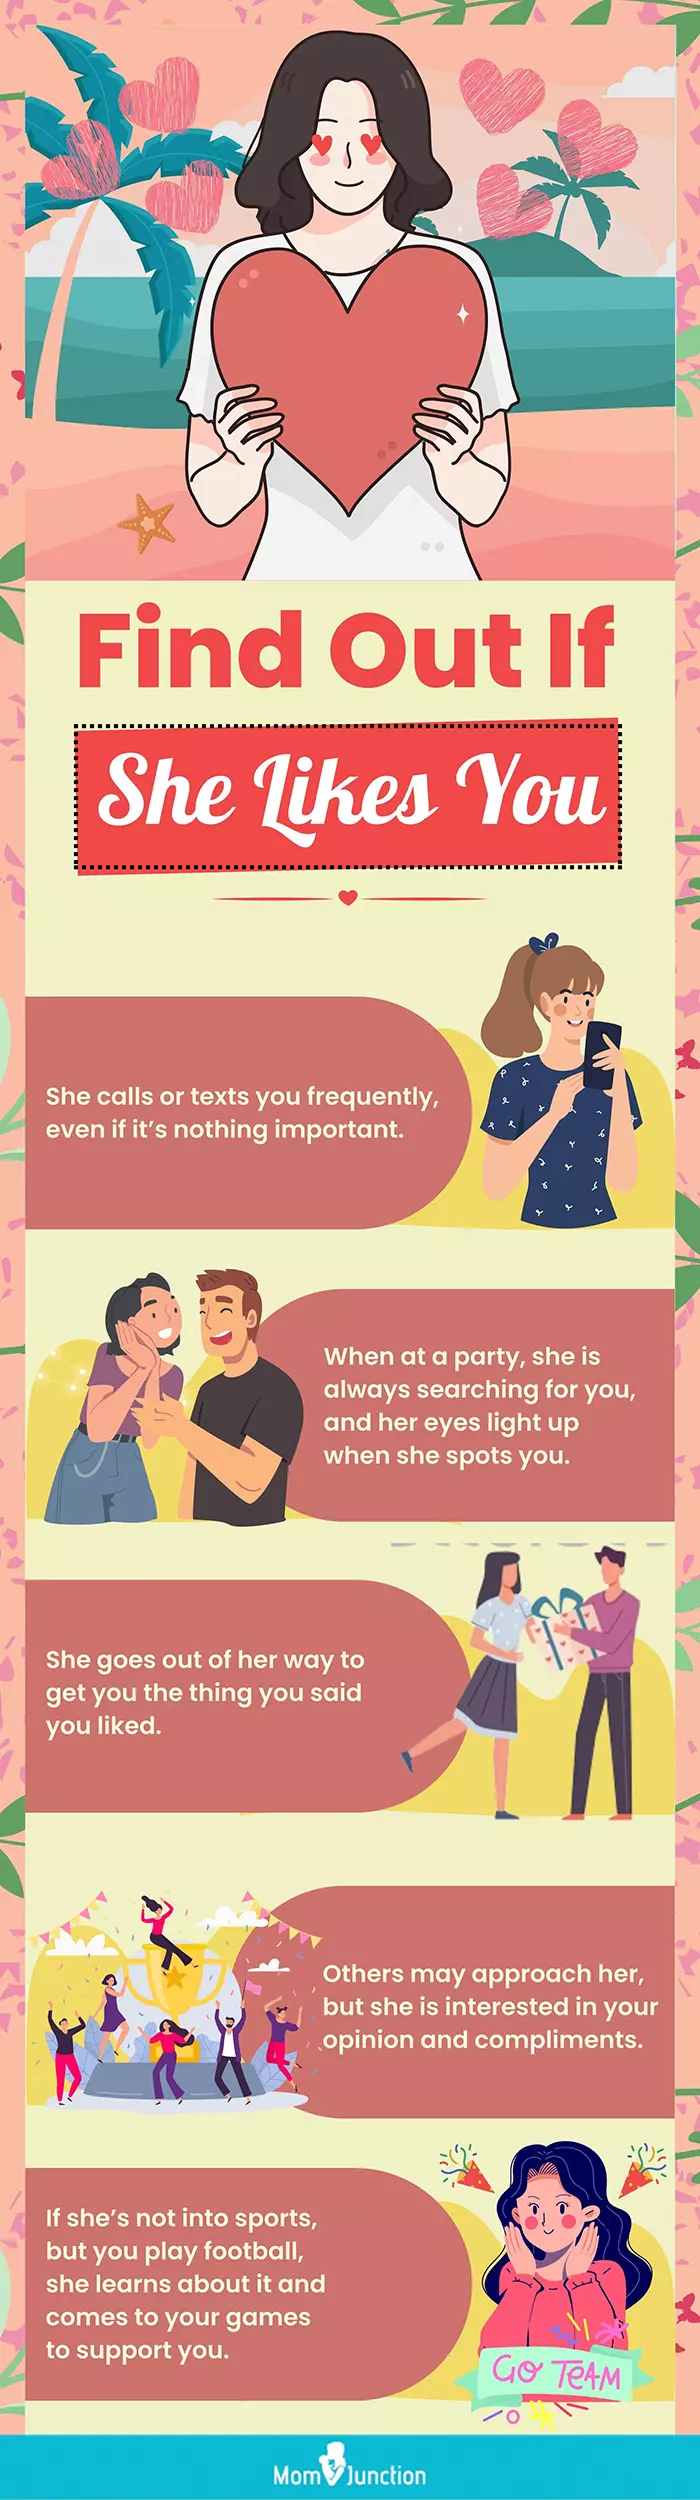 signs if she like you (infographic)